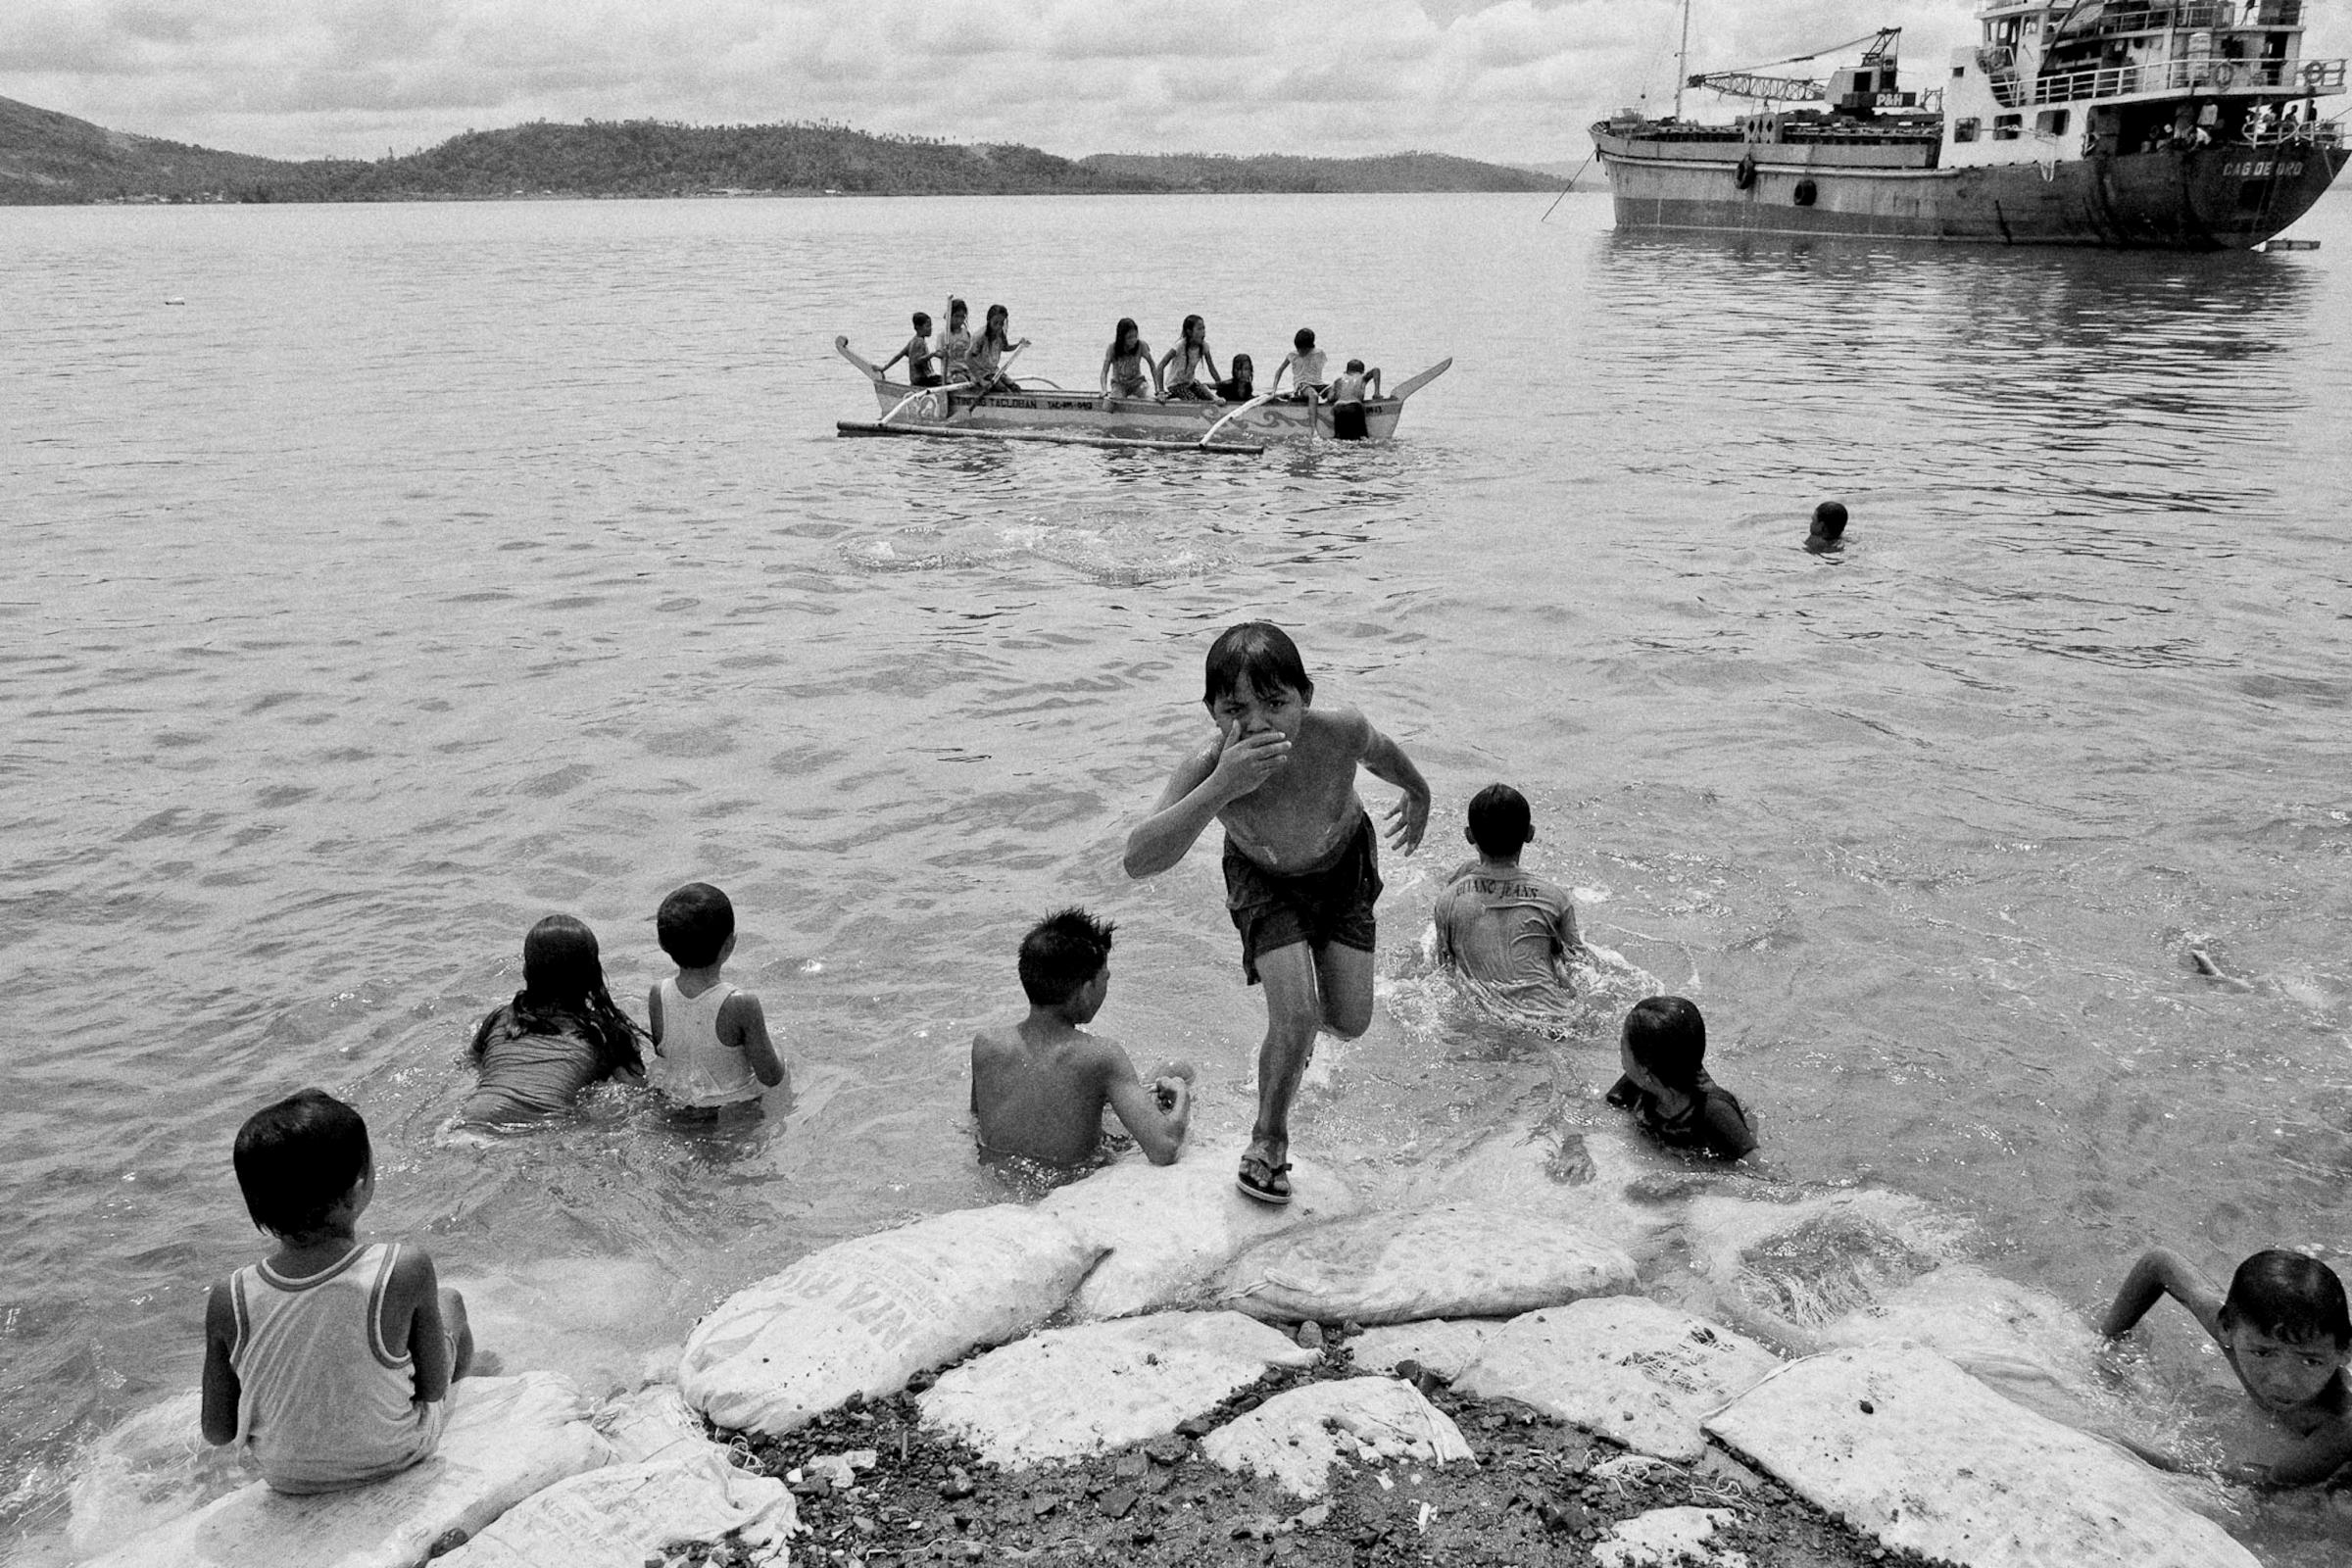 Children take a dip along the coast of Leyte on June 30, 2014.